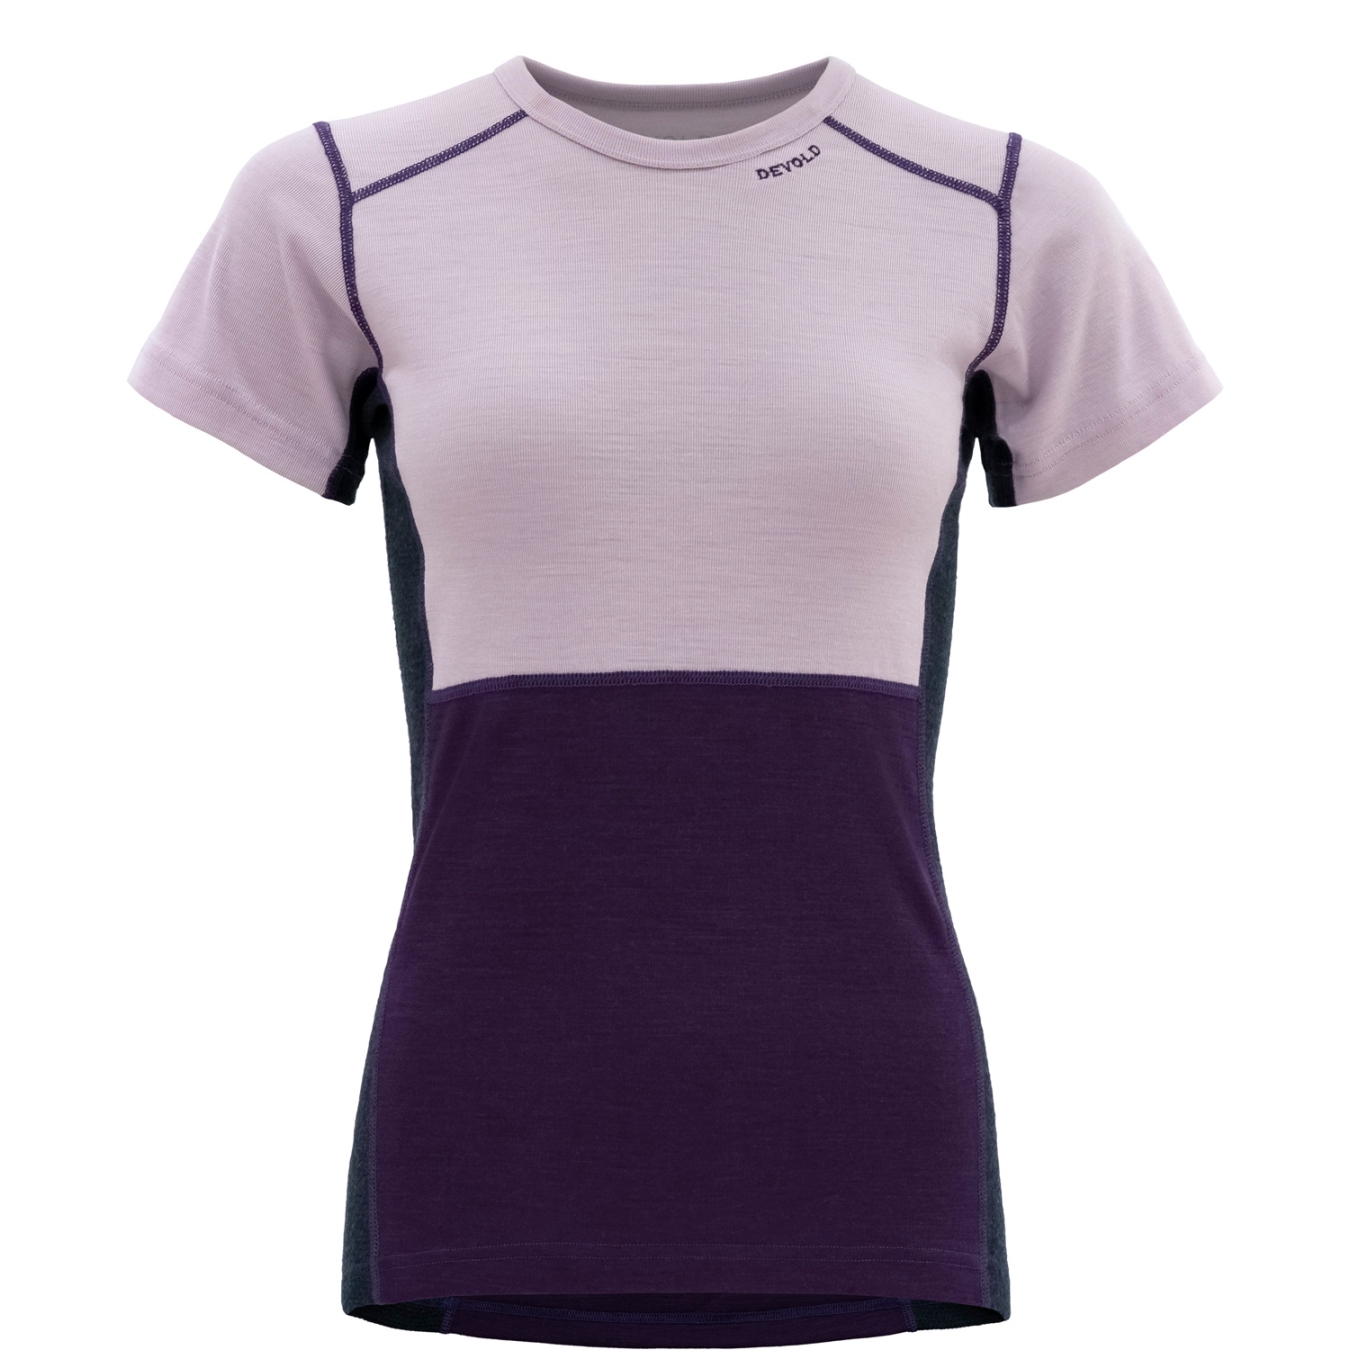 Picture of Devold Lauparen Merino 190 T-Shirt Women - 167 Orchid/Lilac/Ink